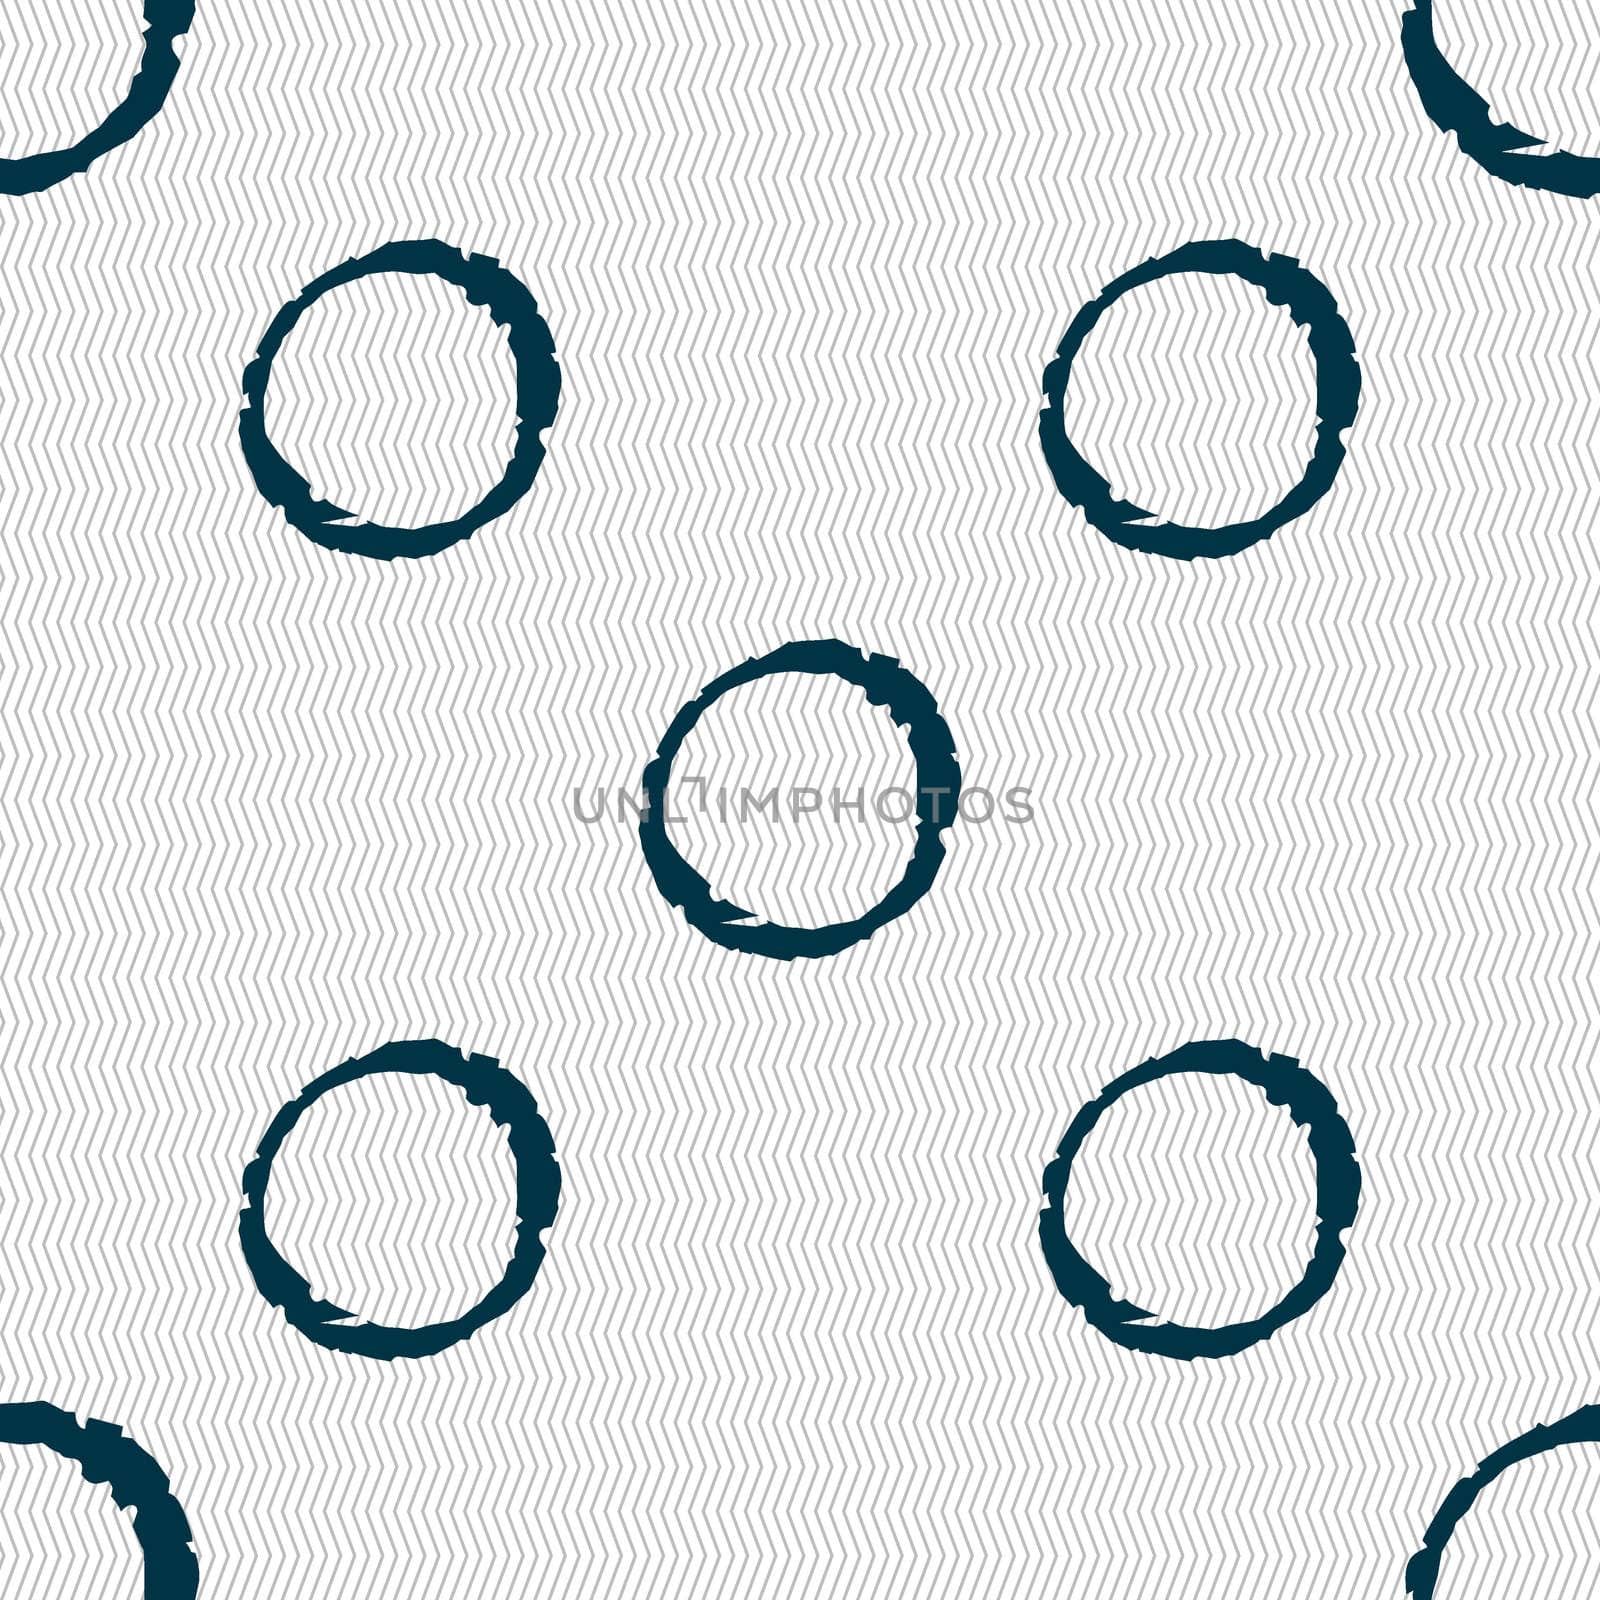 number zero icon sign. Seamless abstract background with geometric shapes. illustration